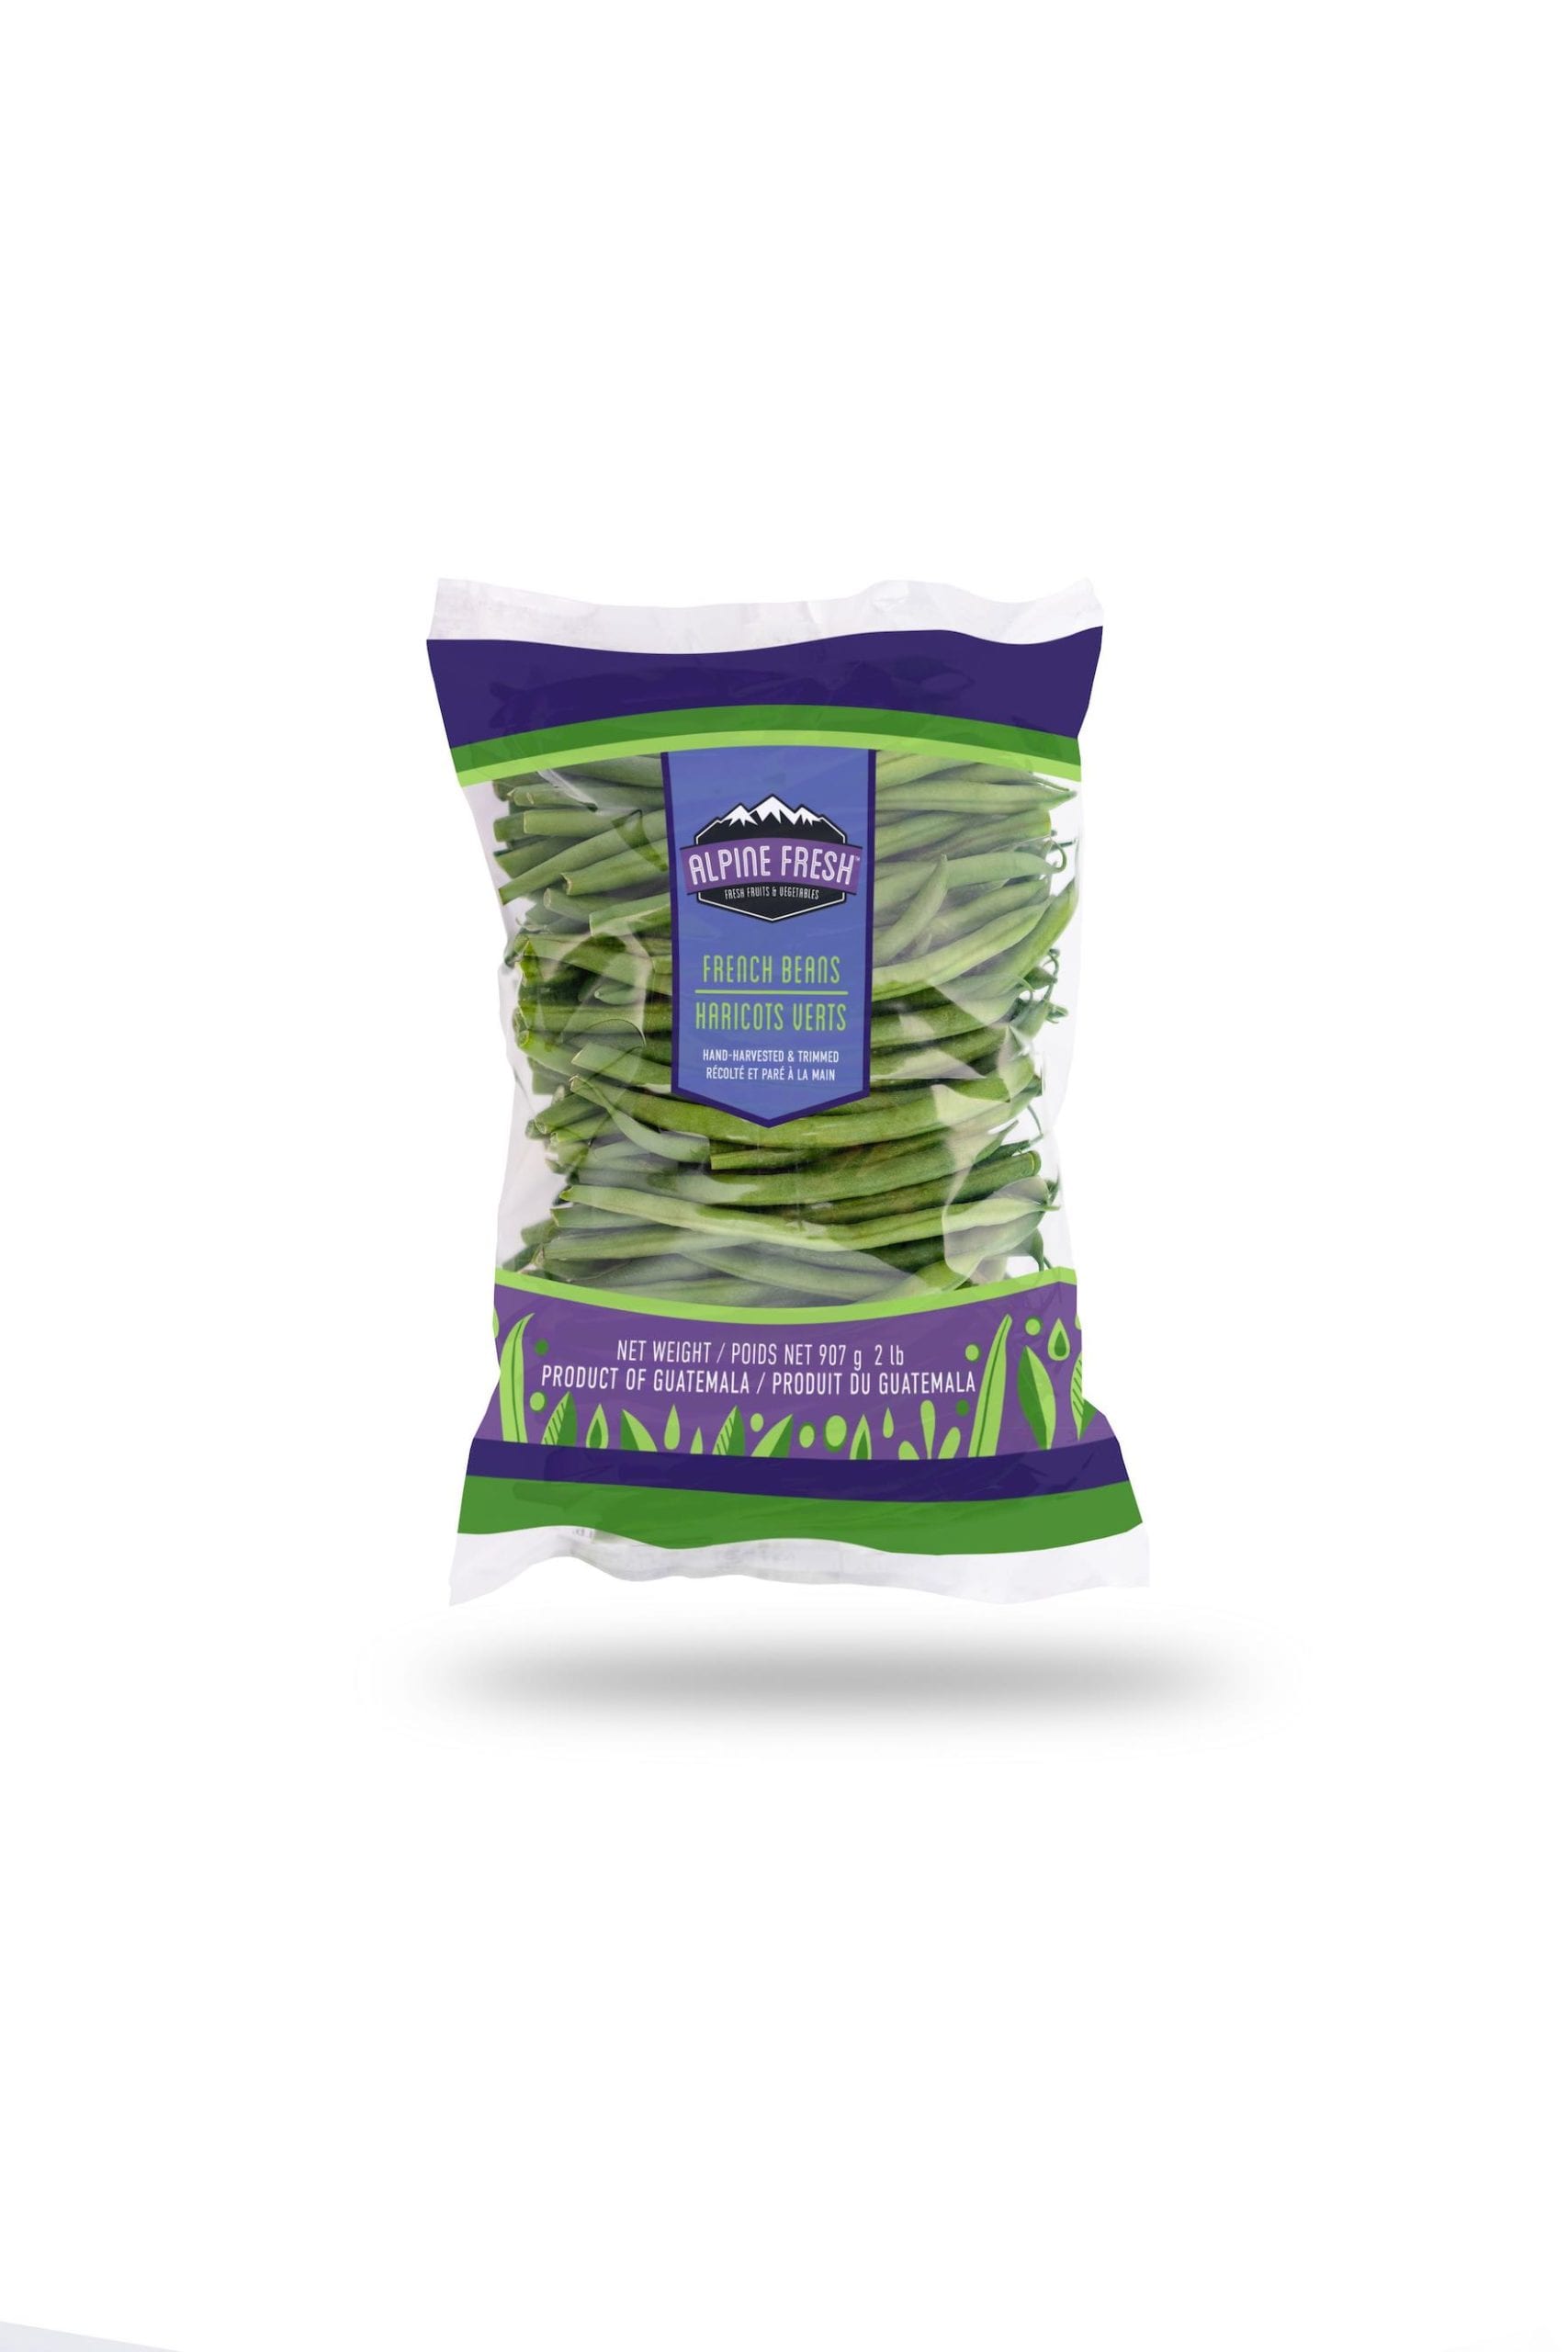 Bag of Alpine Fresh French Green Beans from Guatemala